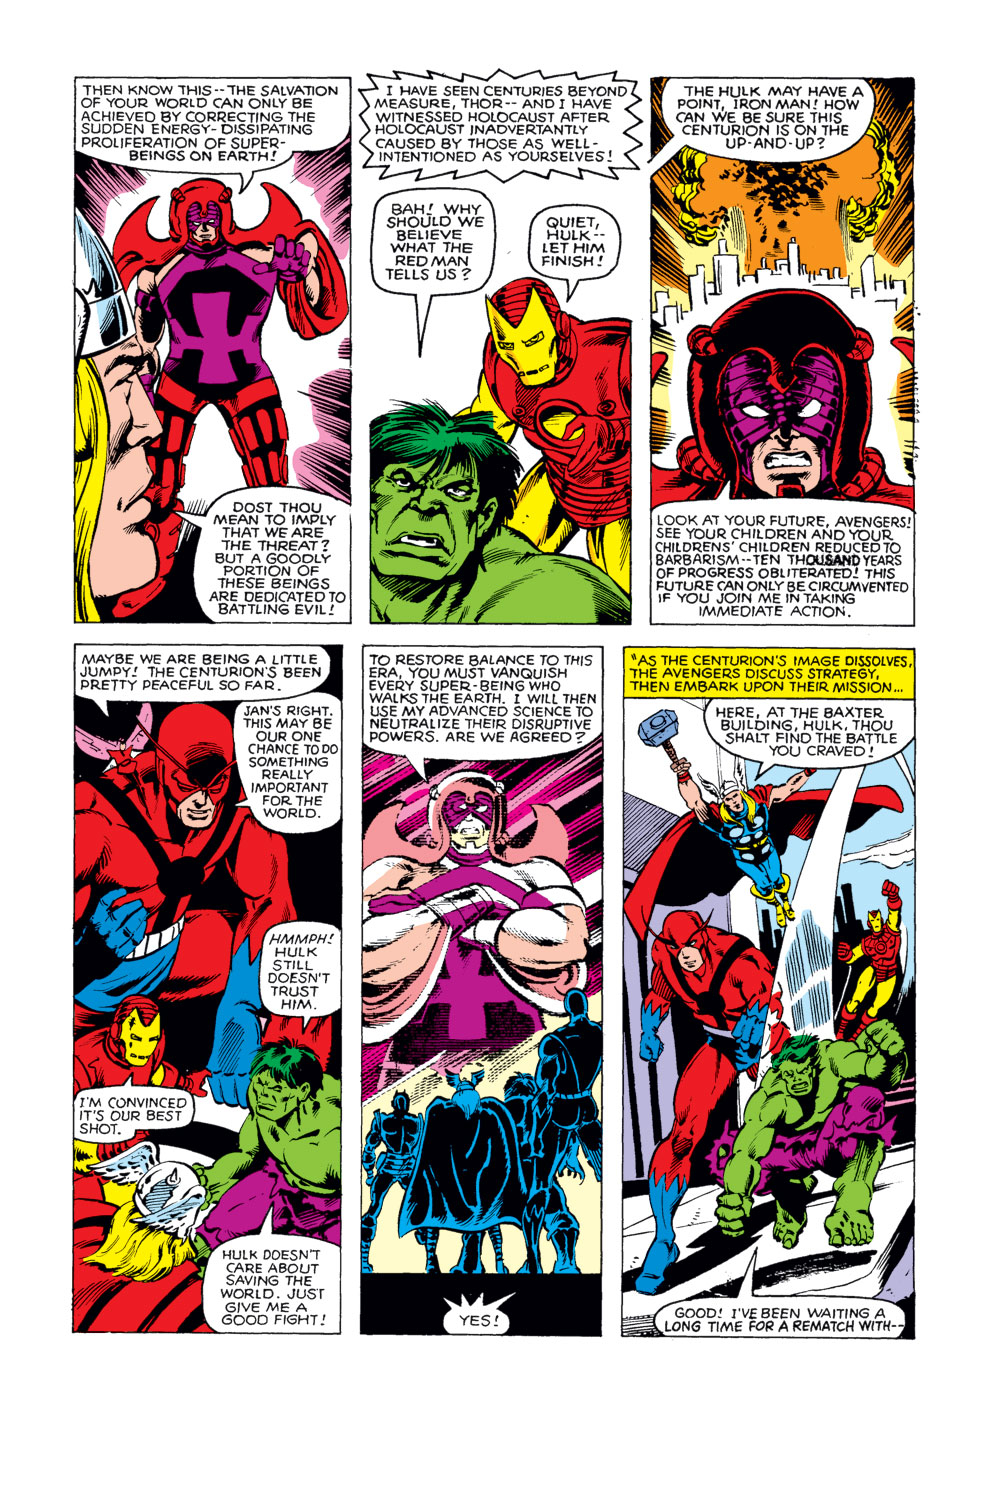 What If? (1977) issue 29 - The Avengers defeated everybody - Page 4